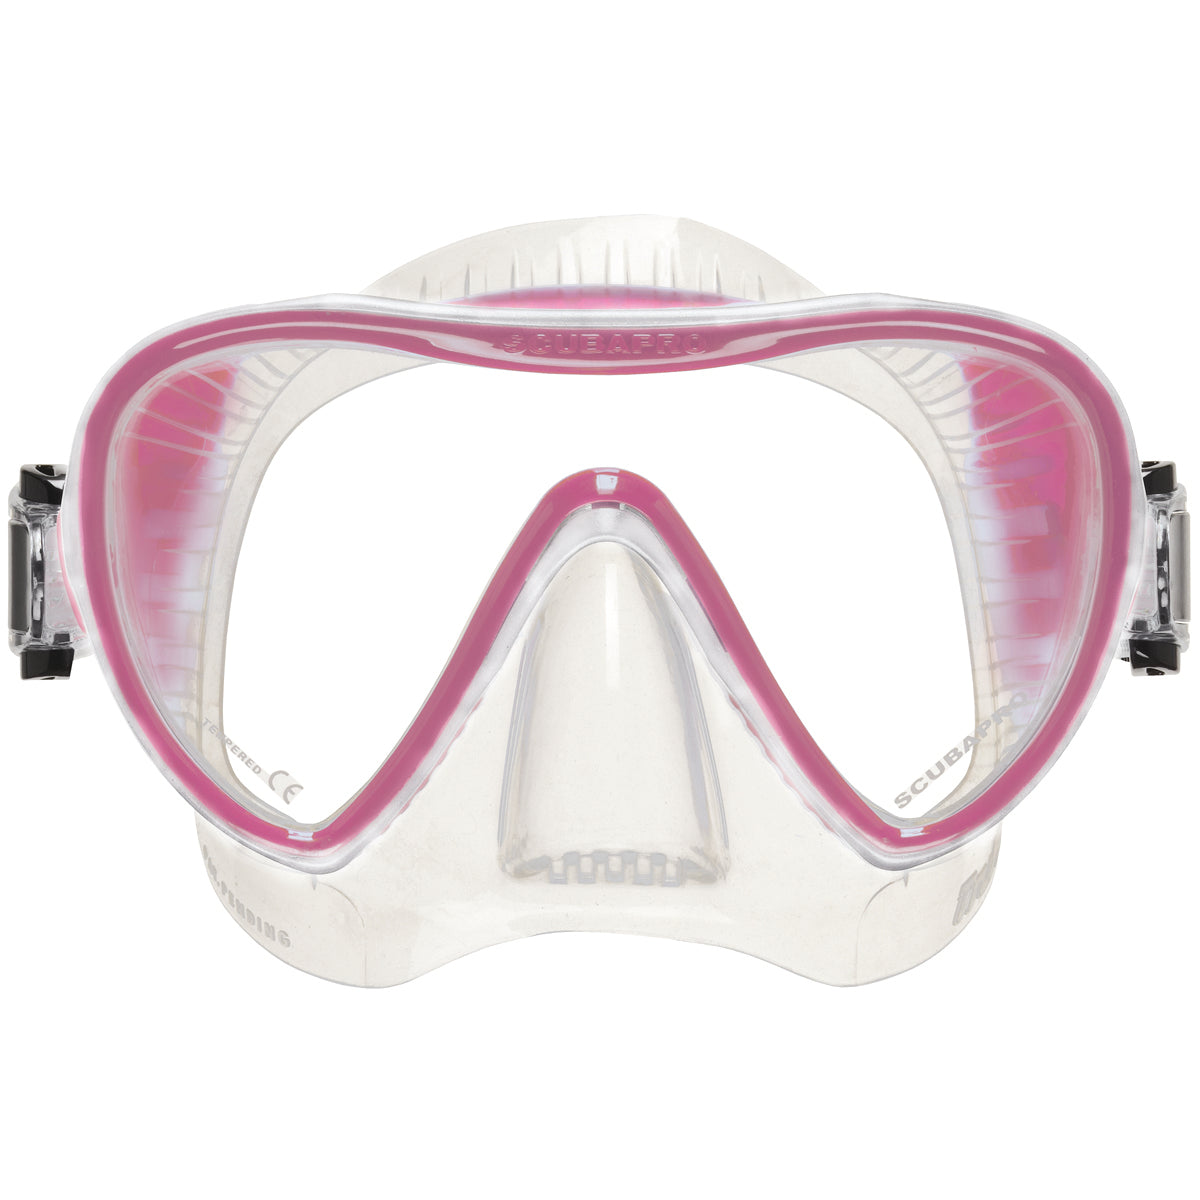 Scubapro Nova 2 Fins Dive Package Pink with Mask, Snorkel and